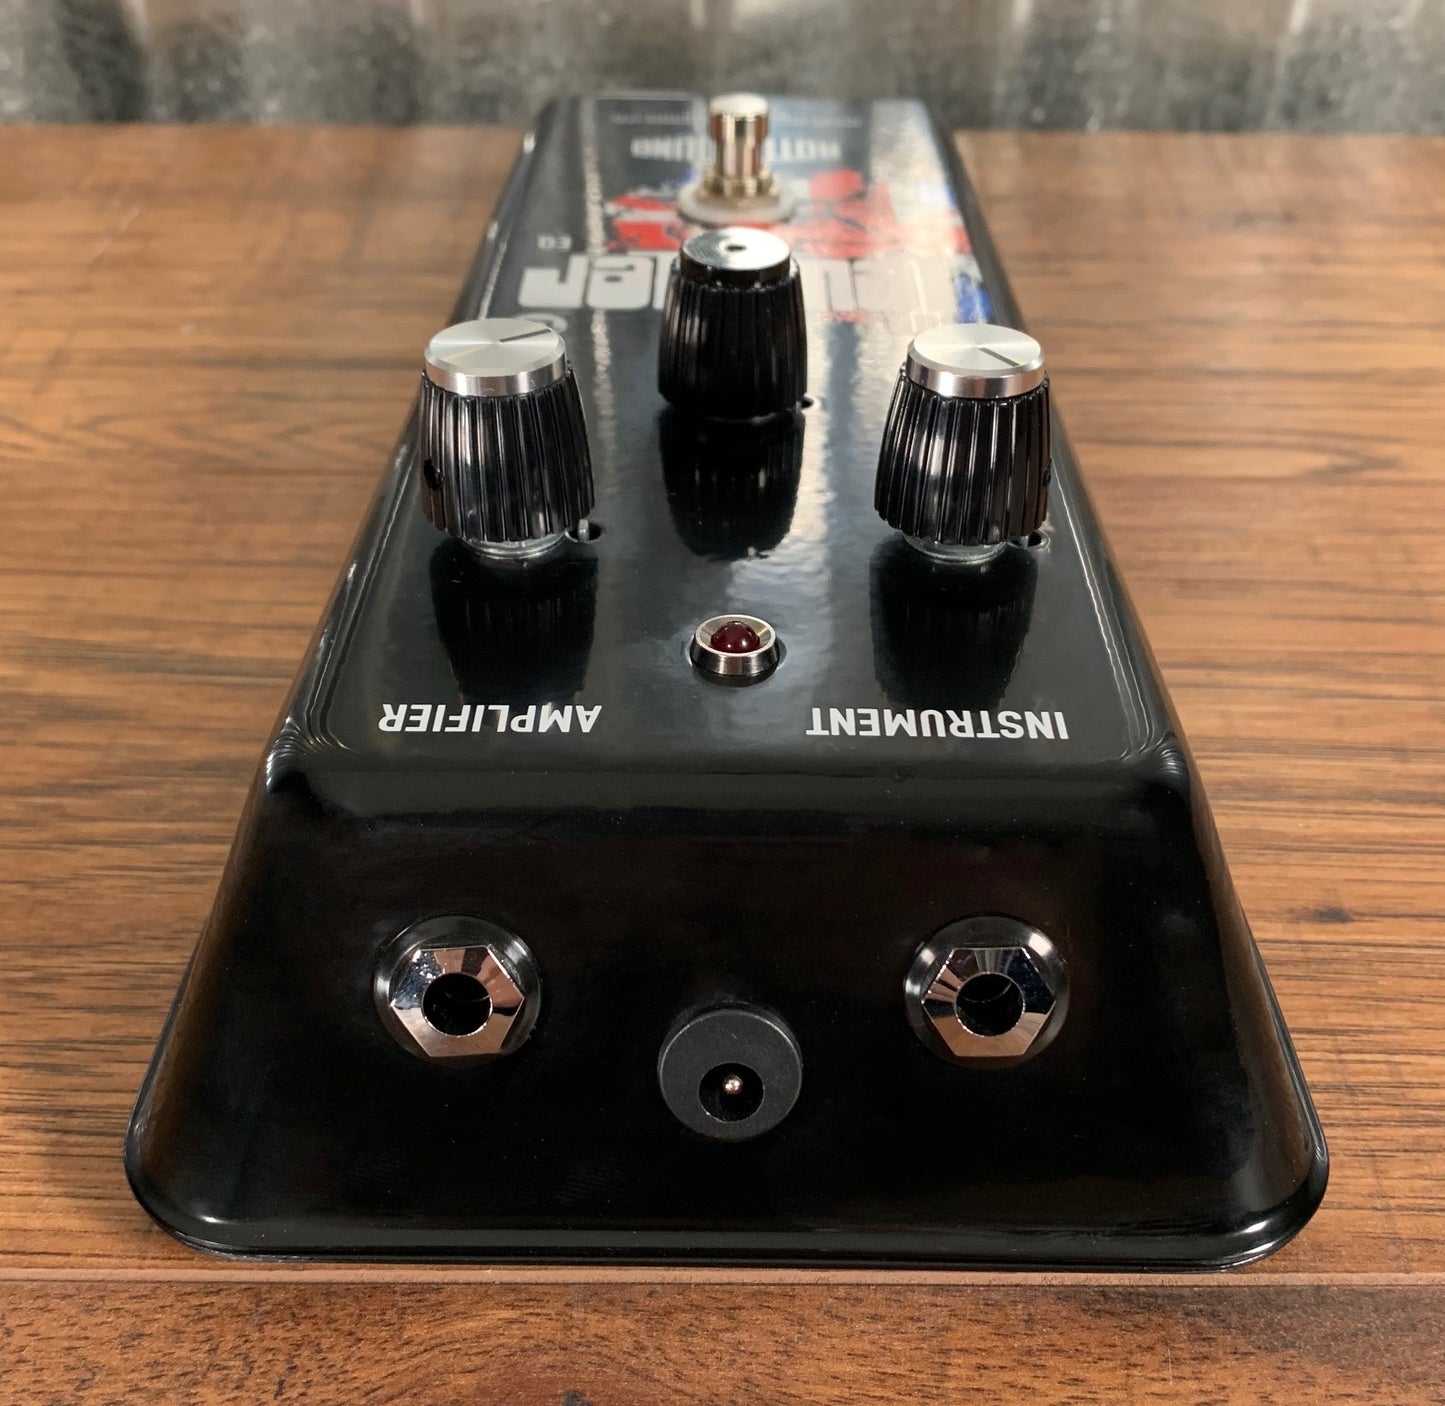 Rotosound The Leveler EQ Hand Built Vintage Style Effect Pedal Used